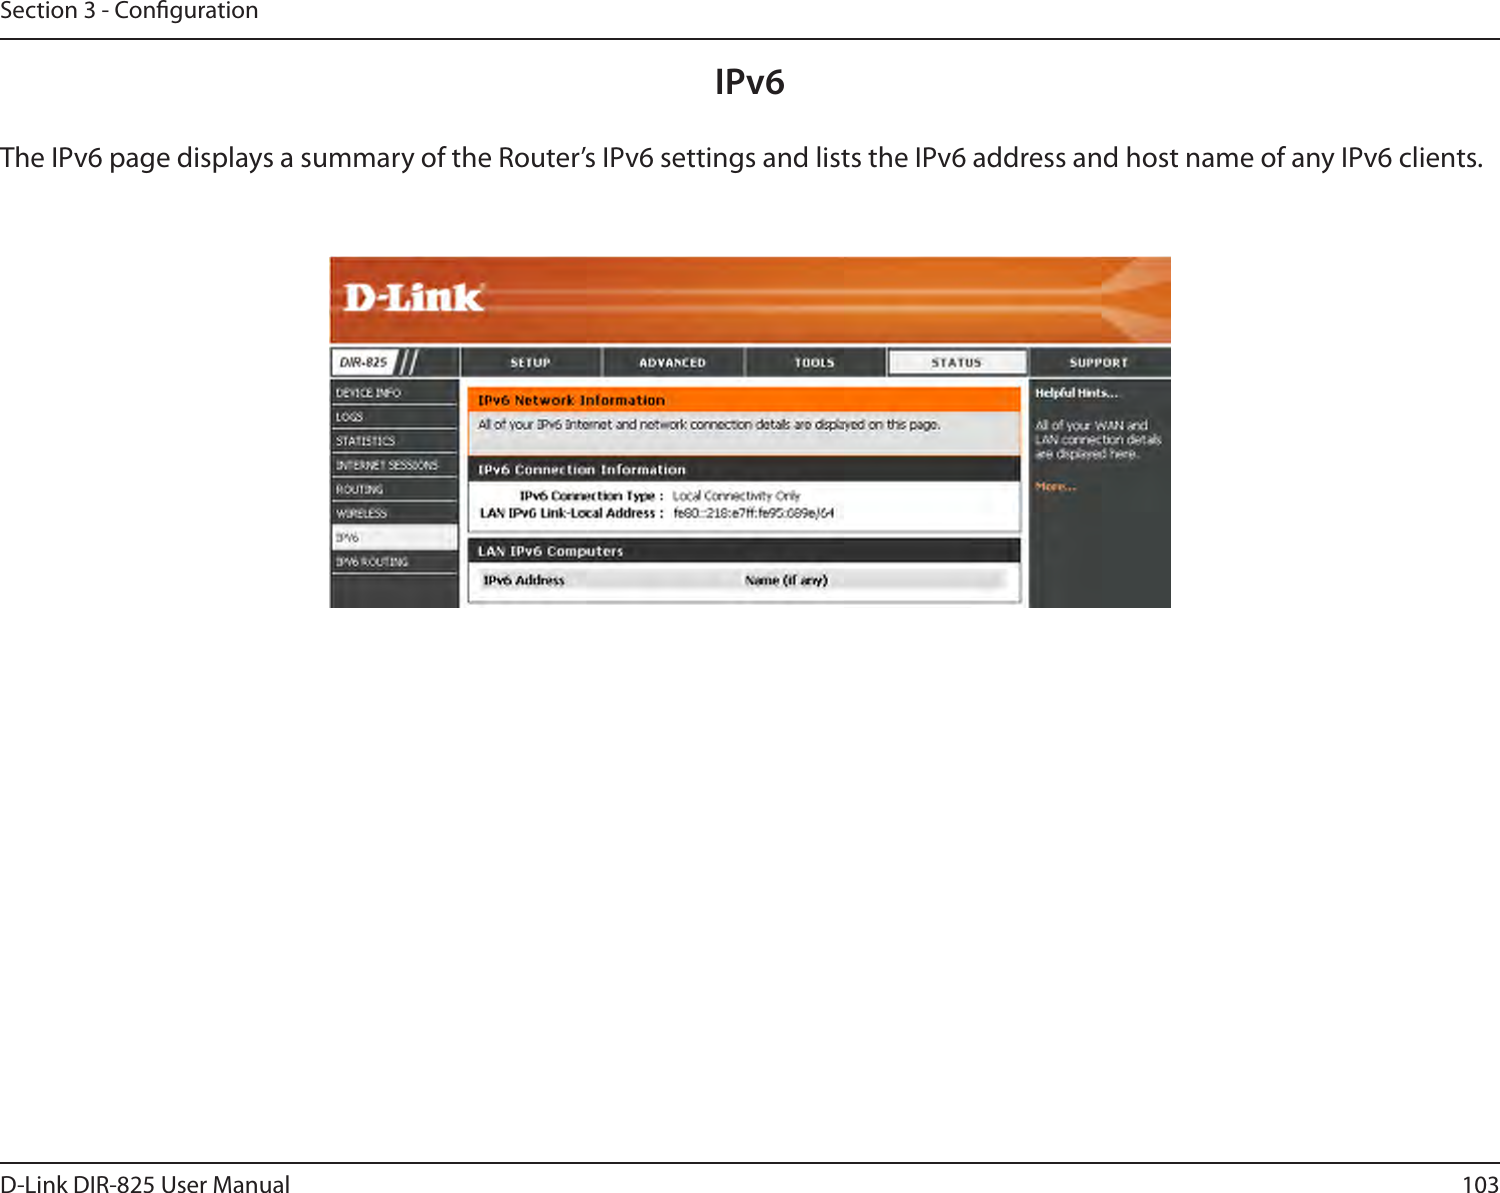 103D-Link DIR-825 User ManualSection 3 - CongurationIPv6The IPv6 page displays a summary of the Router’s IPv6 settings and lists the IPv6 address and host name of any IPv6 clients. 